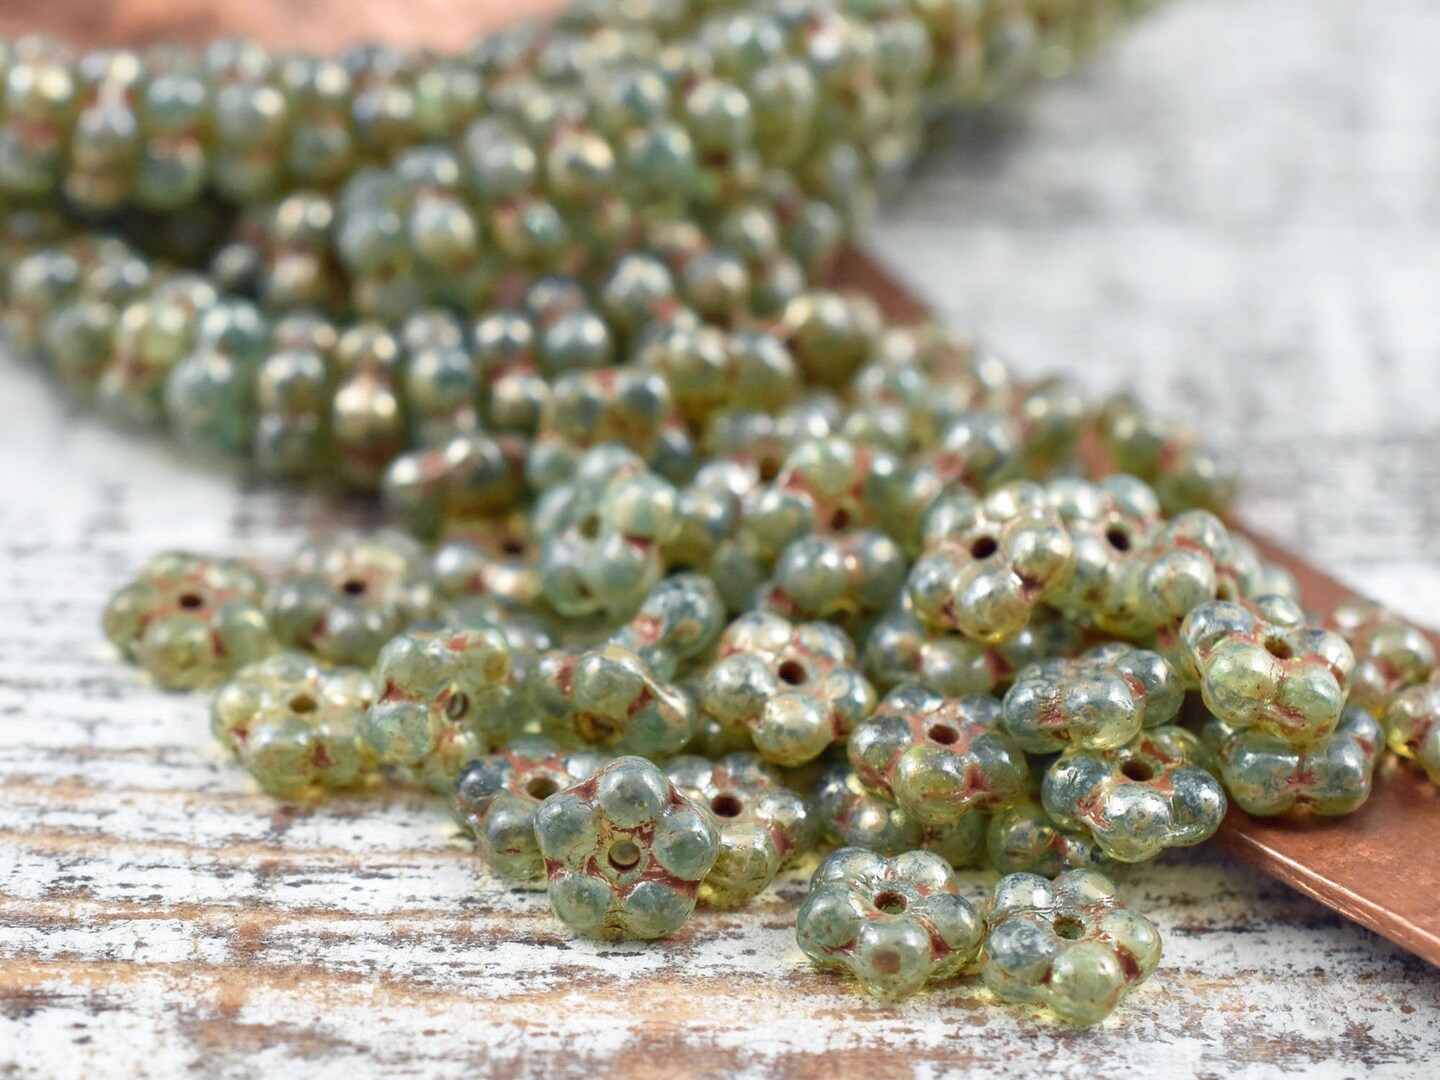 *50* 5mm Green Aqua Picasso Forget Me Not Rondelle Daisy Beads